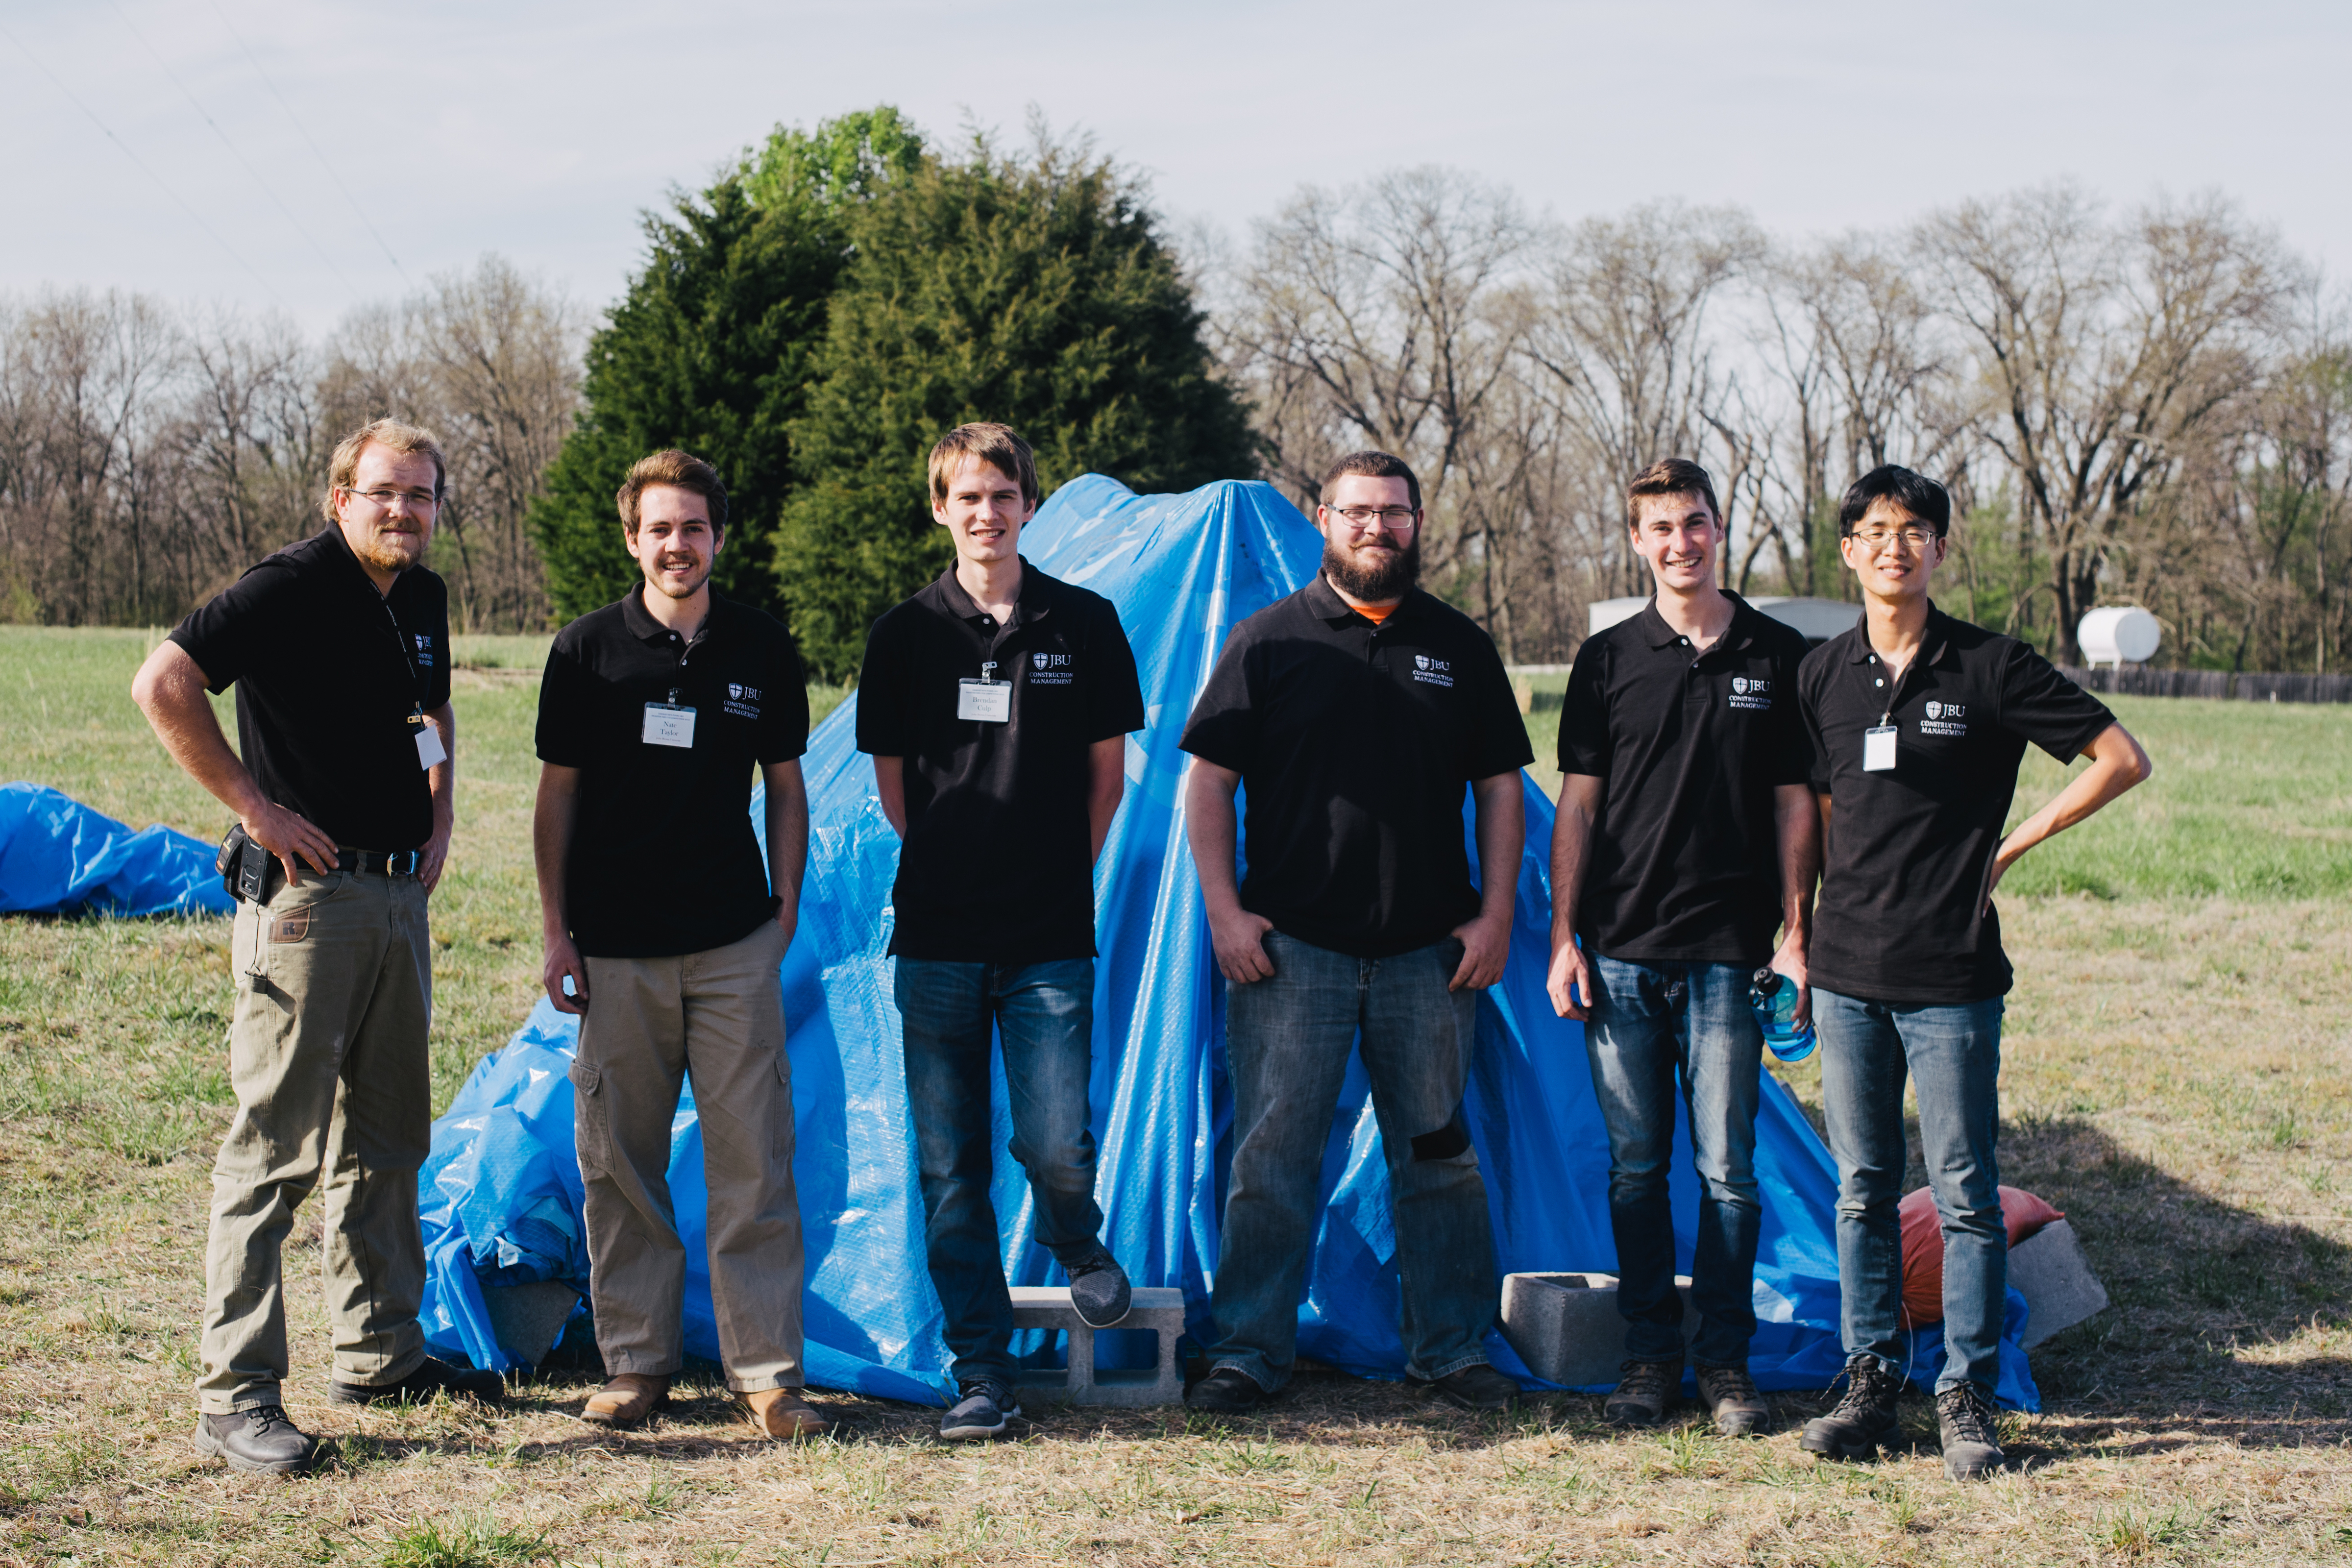 JBU Places Third at 7th Annual Disaster Shelter Design Competition